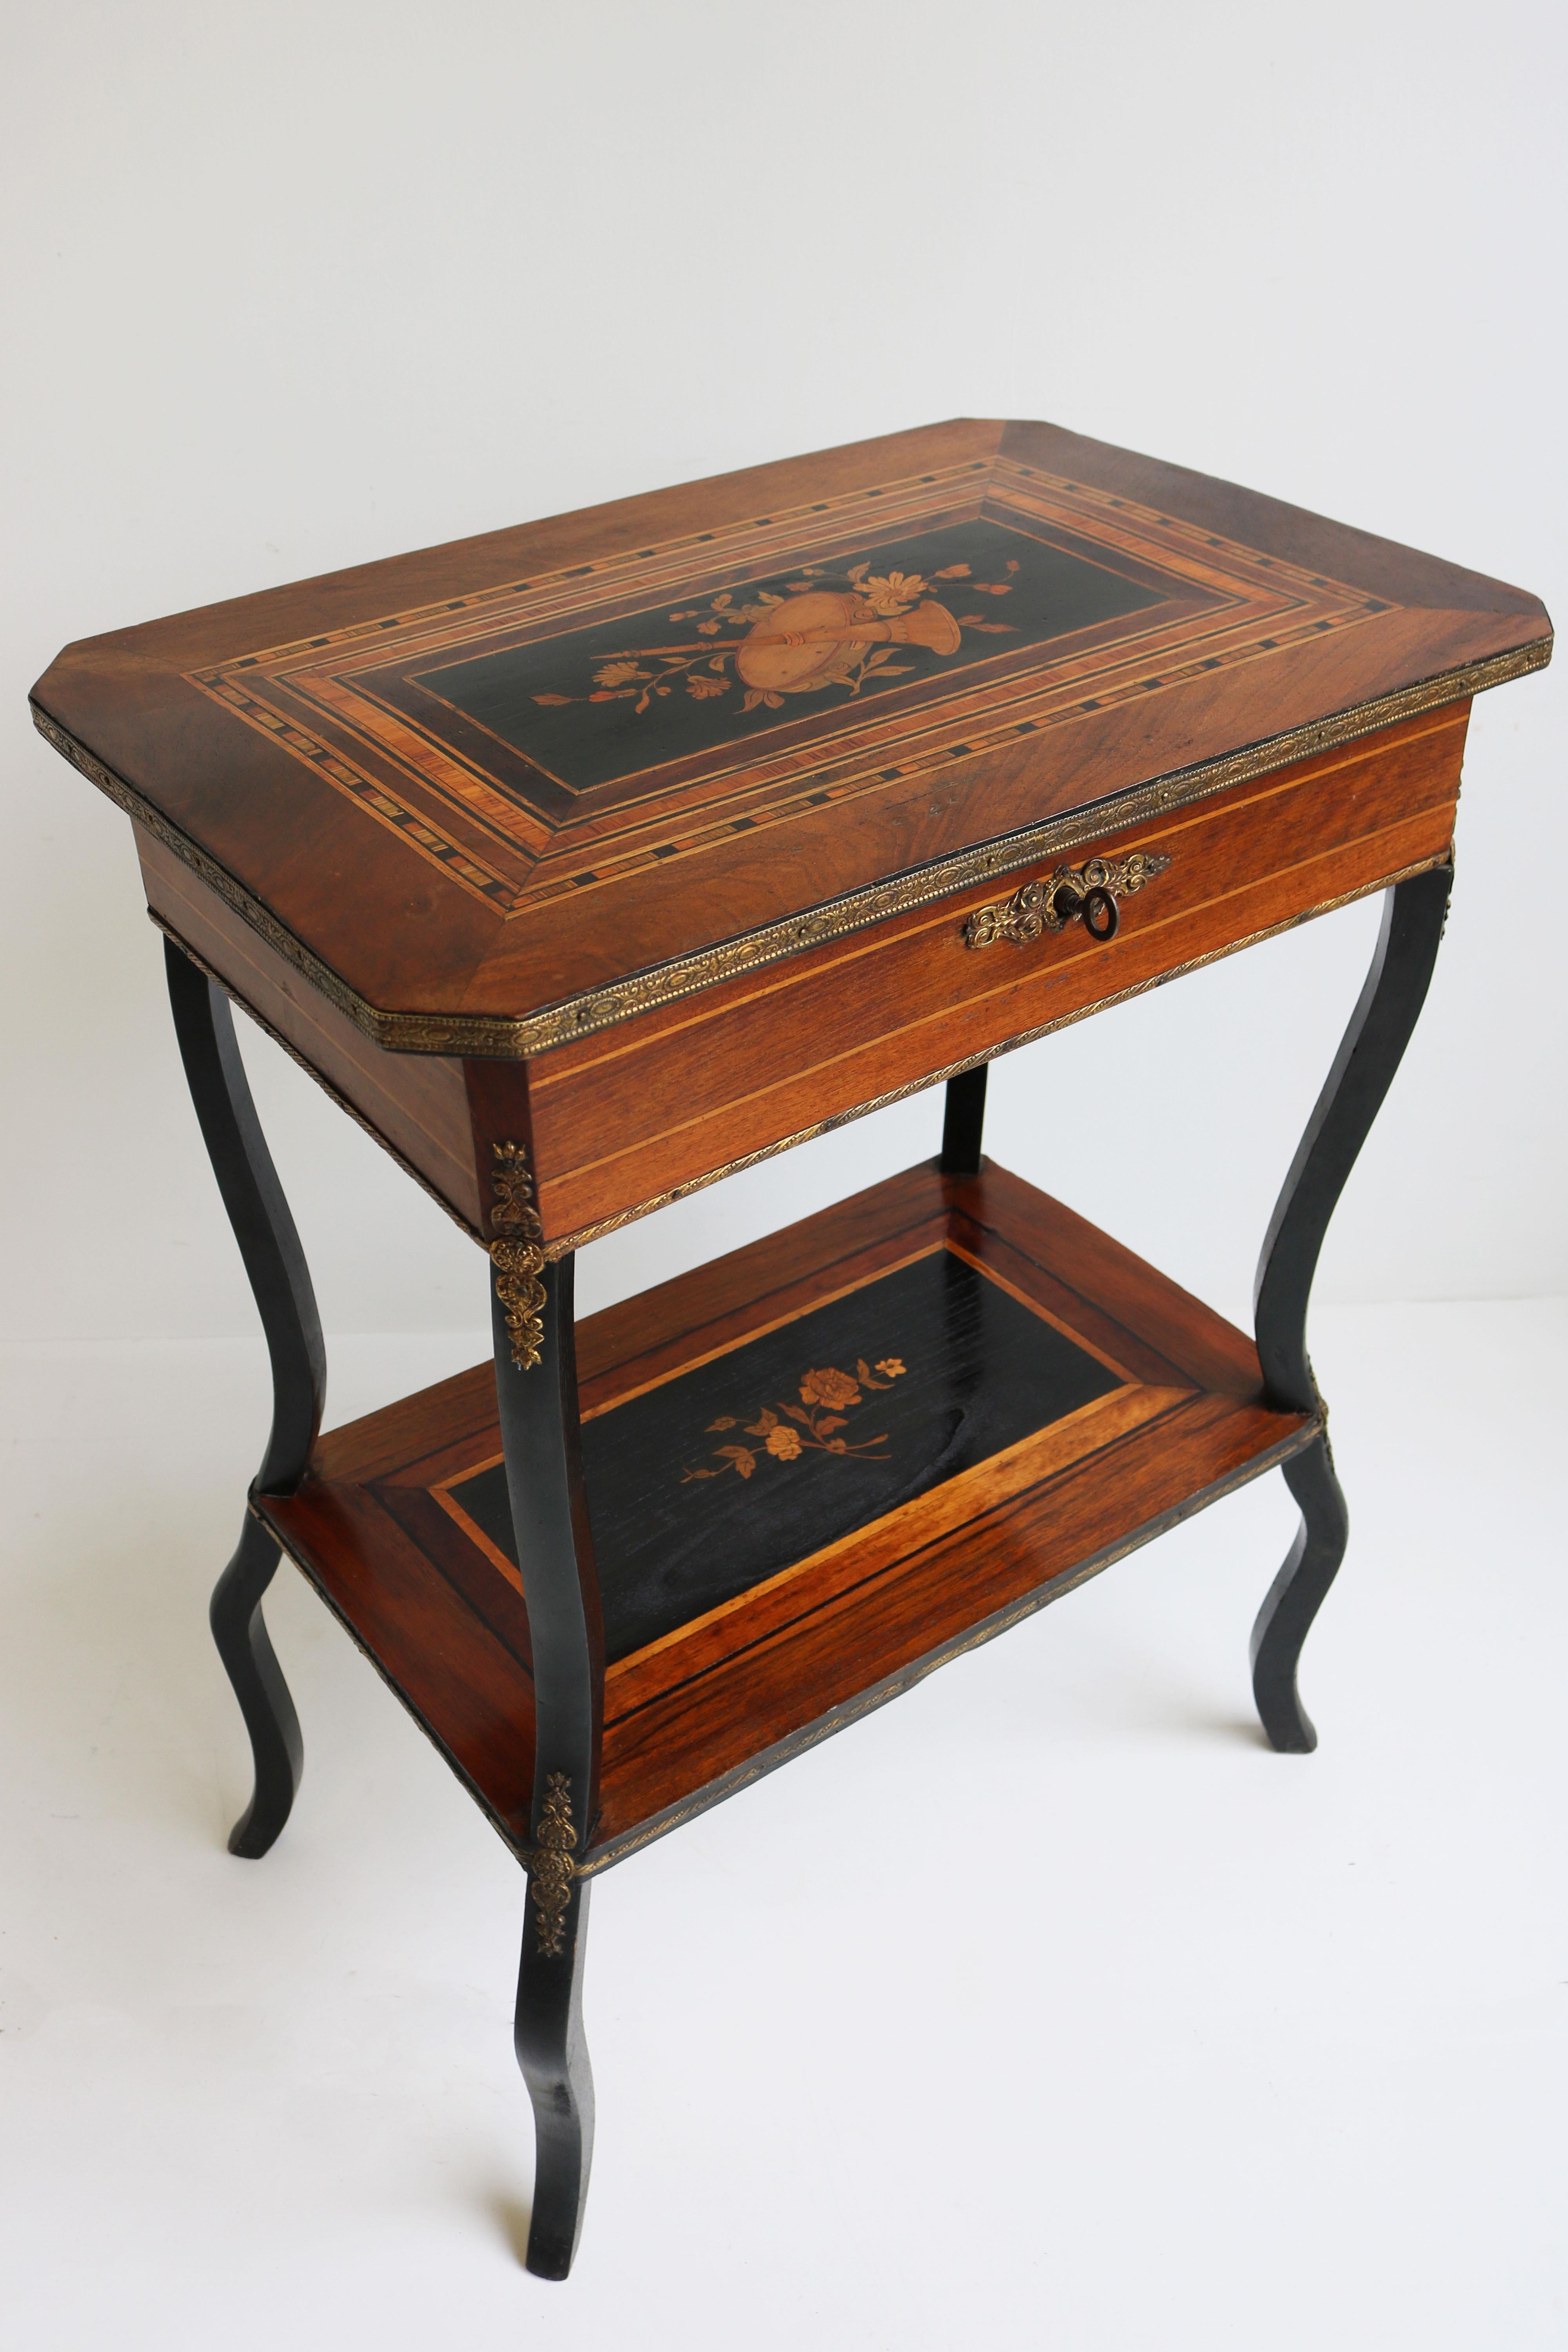 Hand-Crafted Antique French Inlaid Napoleon III Side Table / Vanity 19th Century Marquetry For Sale